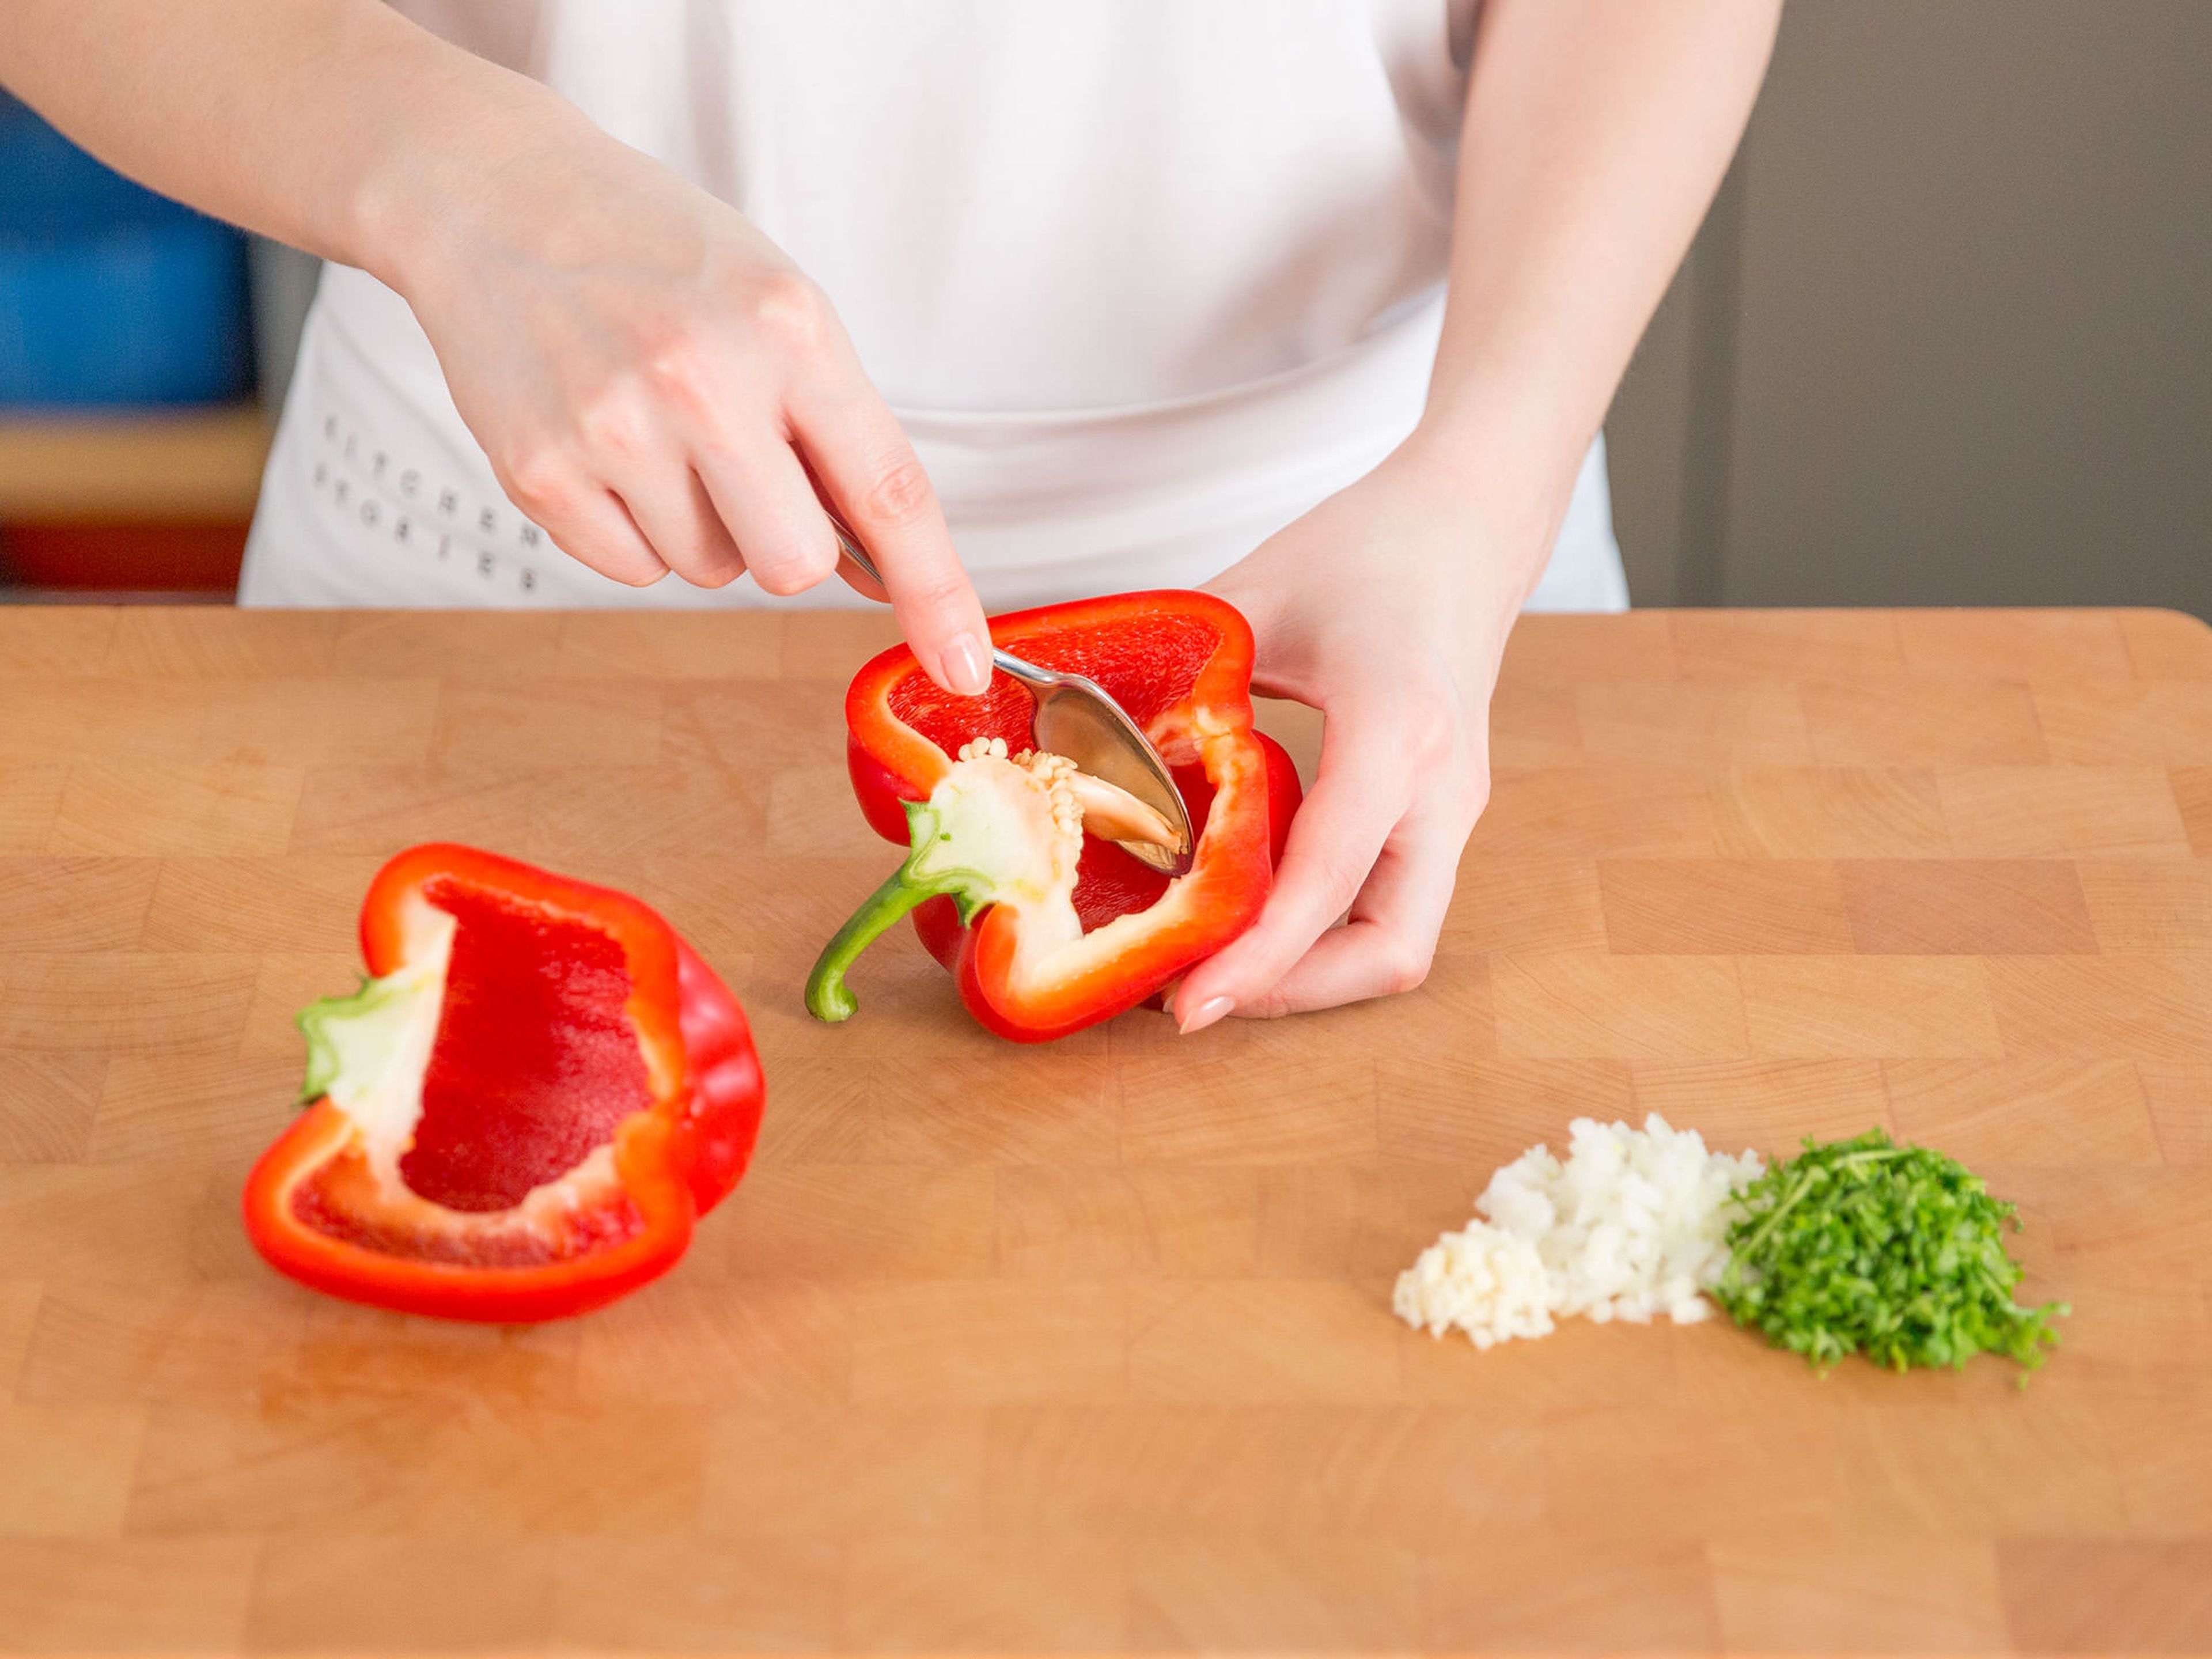 Finely chop onion and garlic into small pieces. Chop marjoram and parsley. Cut peppers in half and remove cores with the help of a spoon. Pre-heat oven to 160°C/320°F.